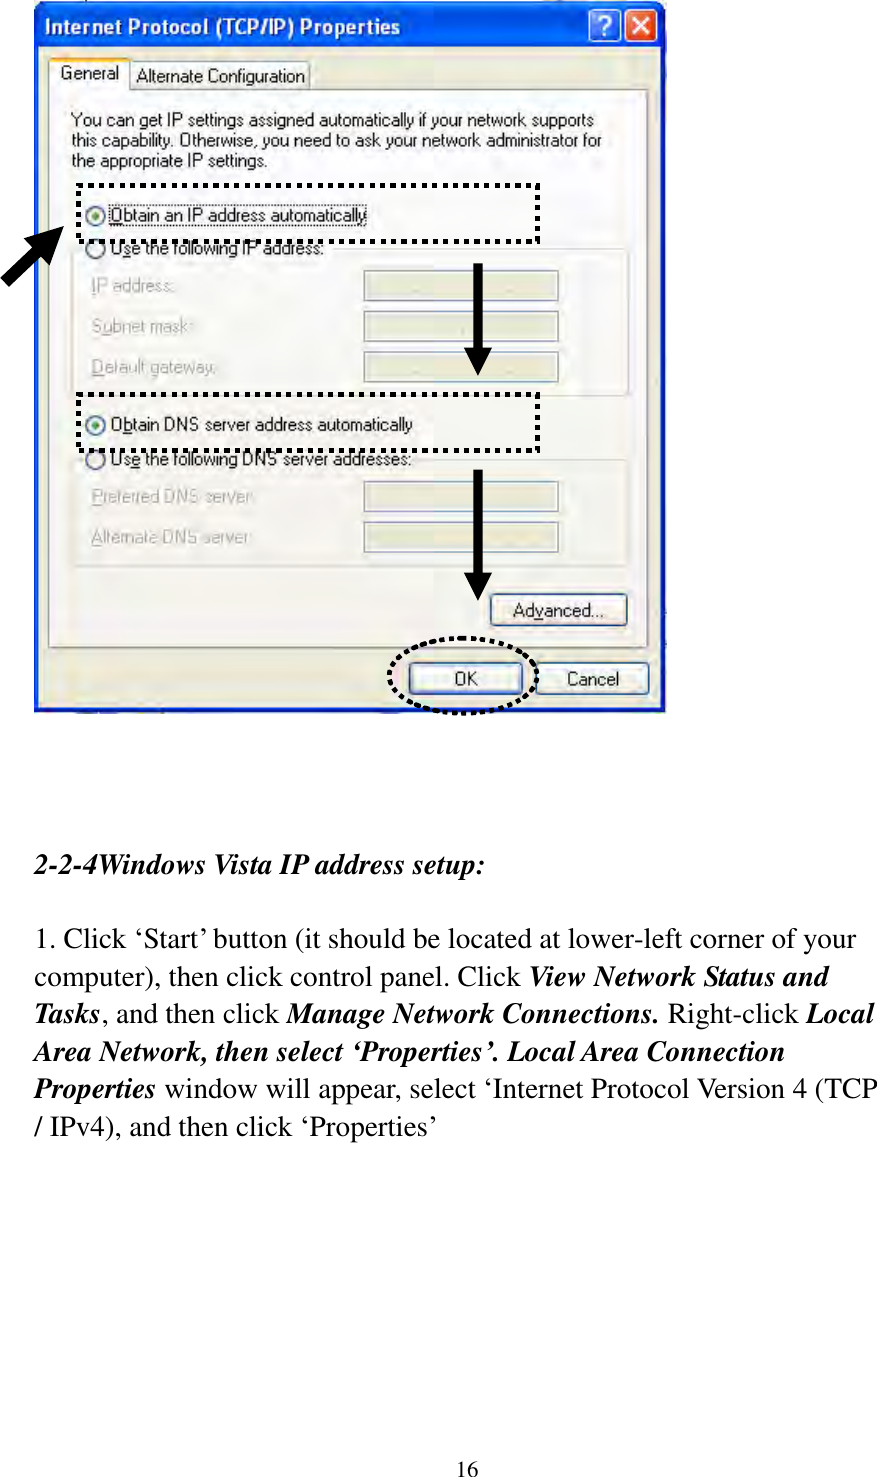 16     2-2-4Windows Vista IP address setup:  1. Click „Start‟ button (it should be located at lower-left corner of your computer), then click control panel. Click View Network Status and Tasks, and then click Manage Network Connections. Right-click Local Area Network, then select ‘Properties’. Local Area Connection Properties window will appear, select „Internet Protocol Version 4 (TCP / IPv4), and then click „Properties‟  